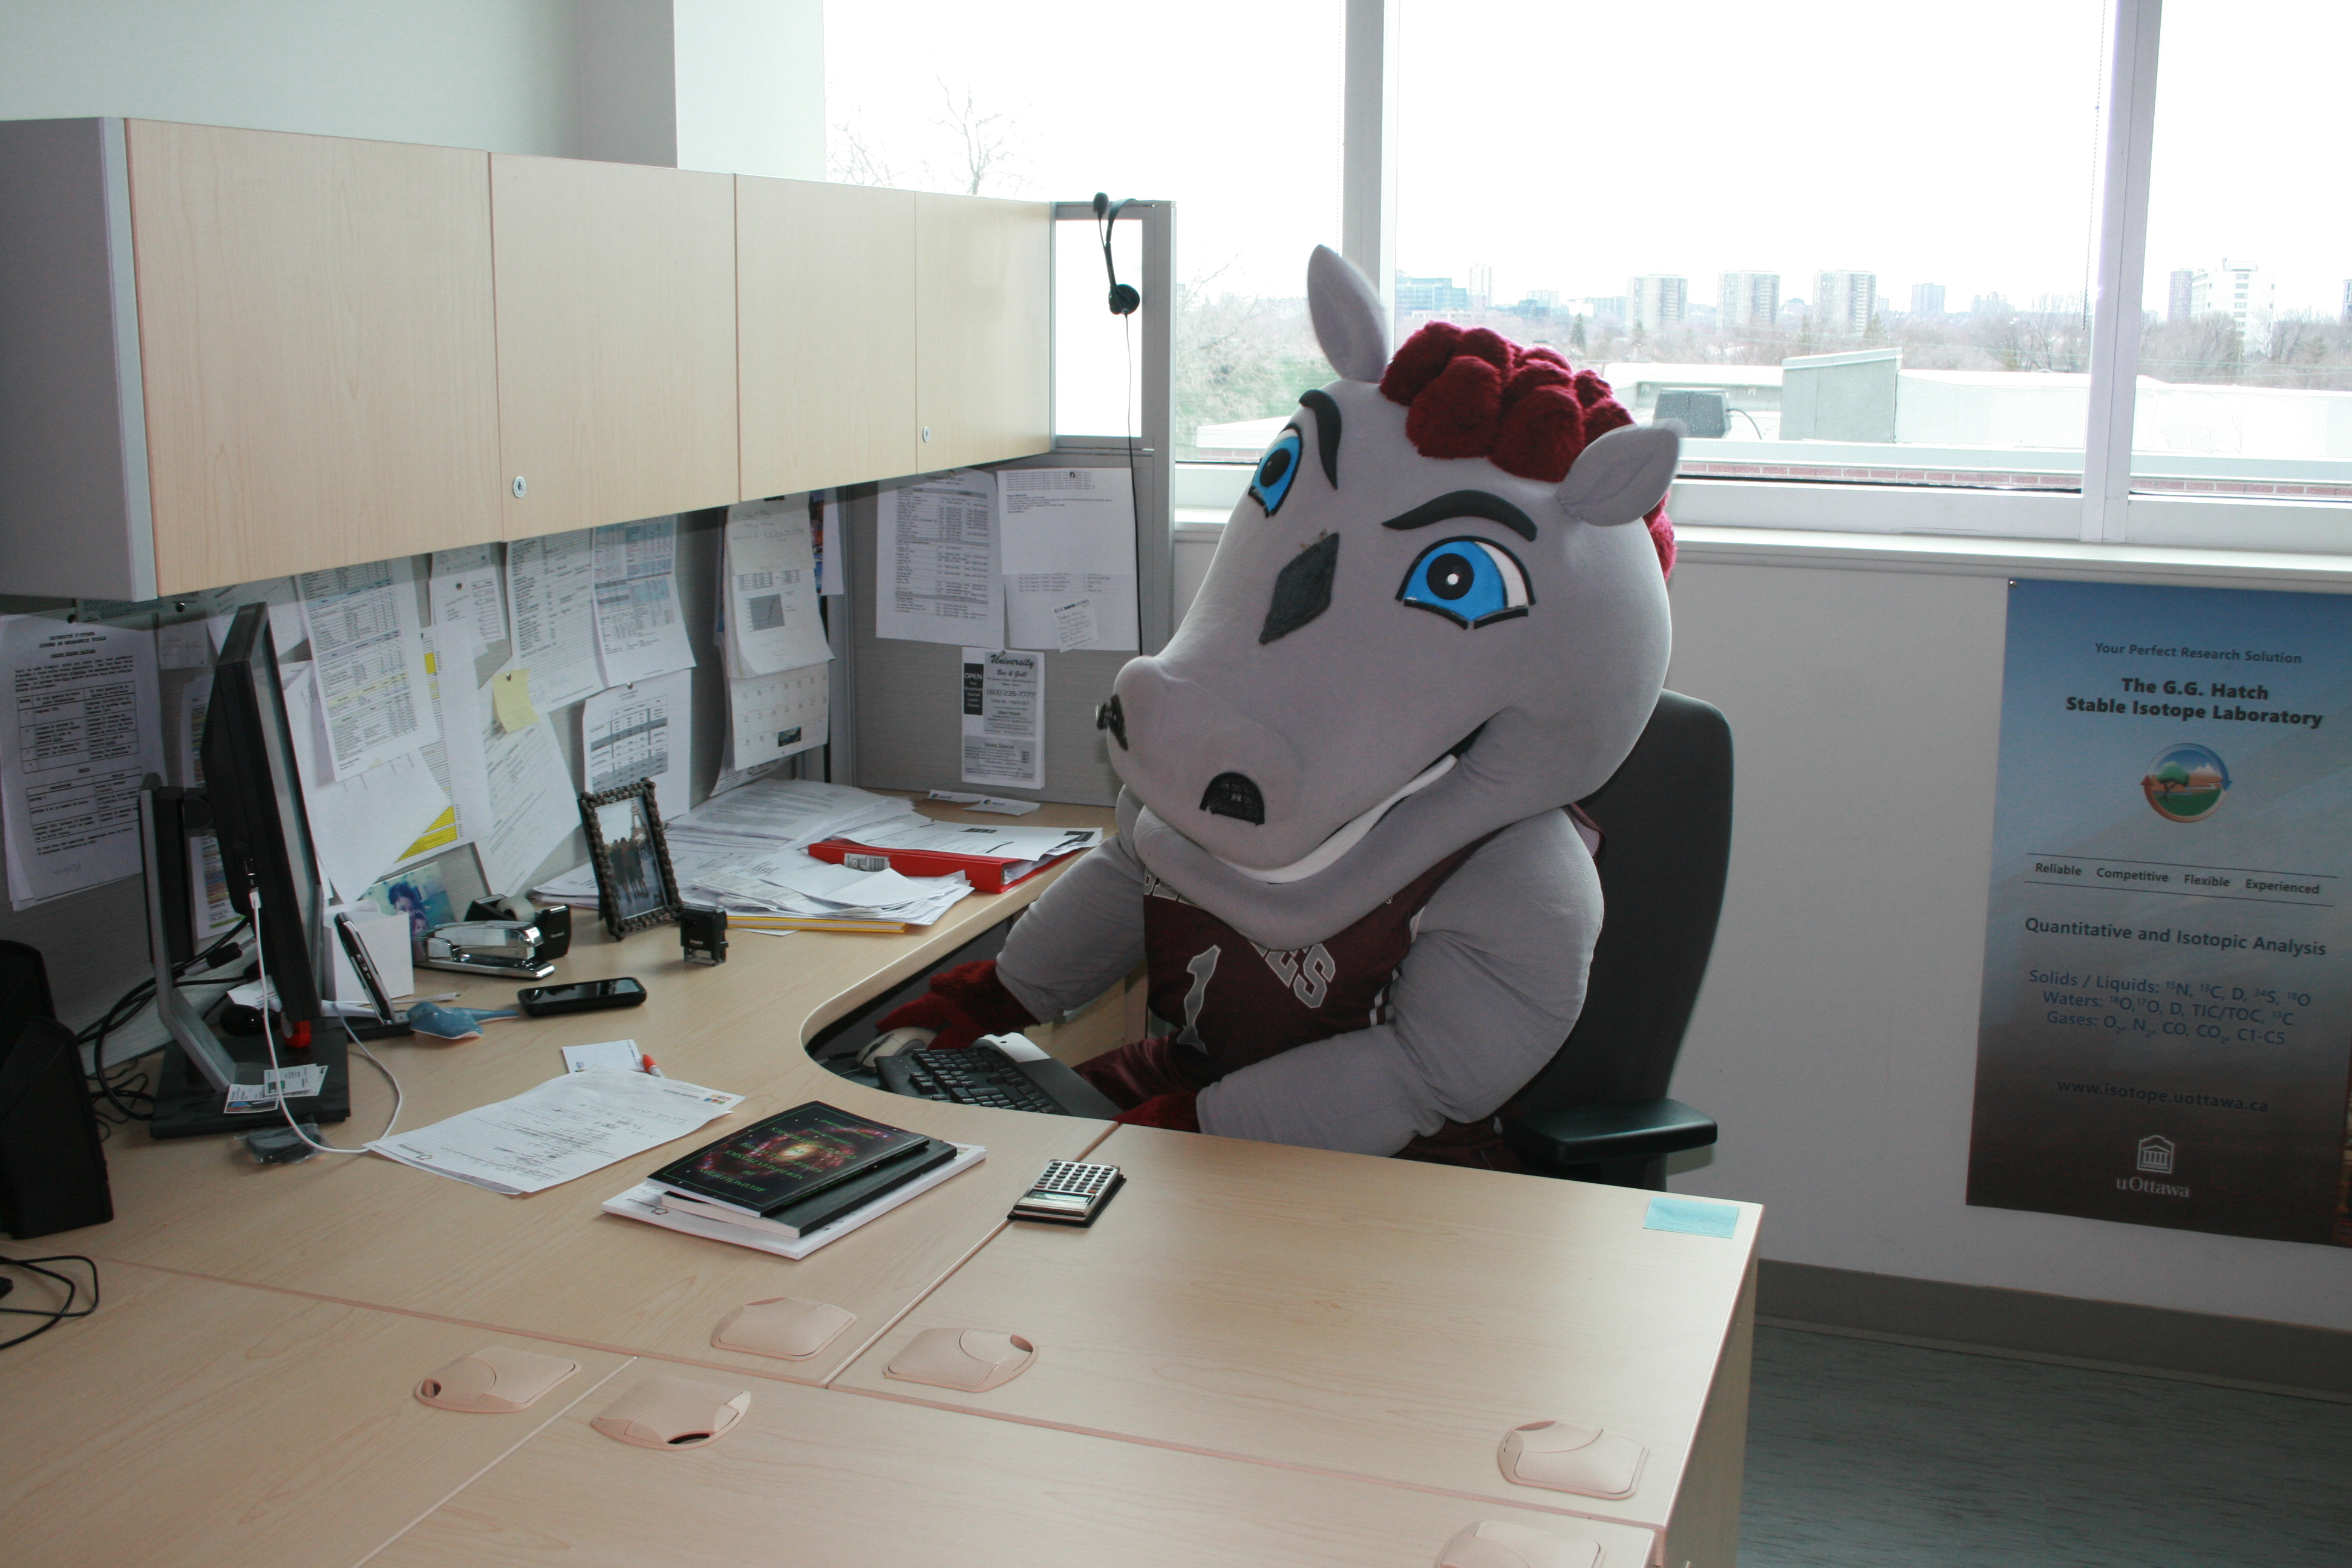 GGEE's mascot sitting at a desk